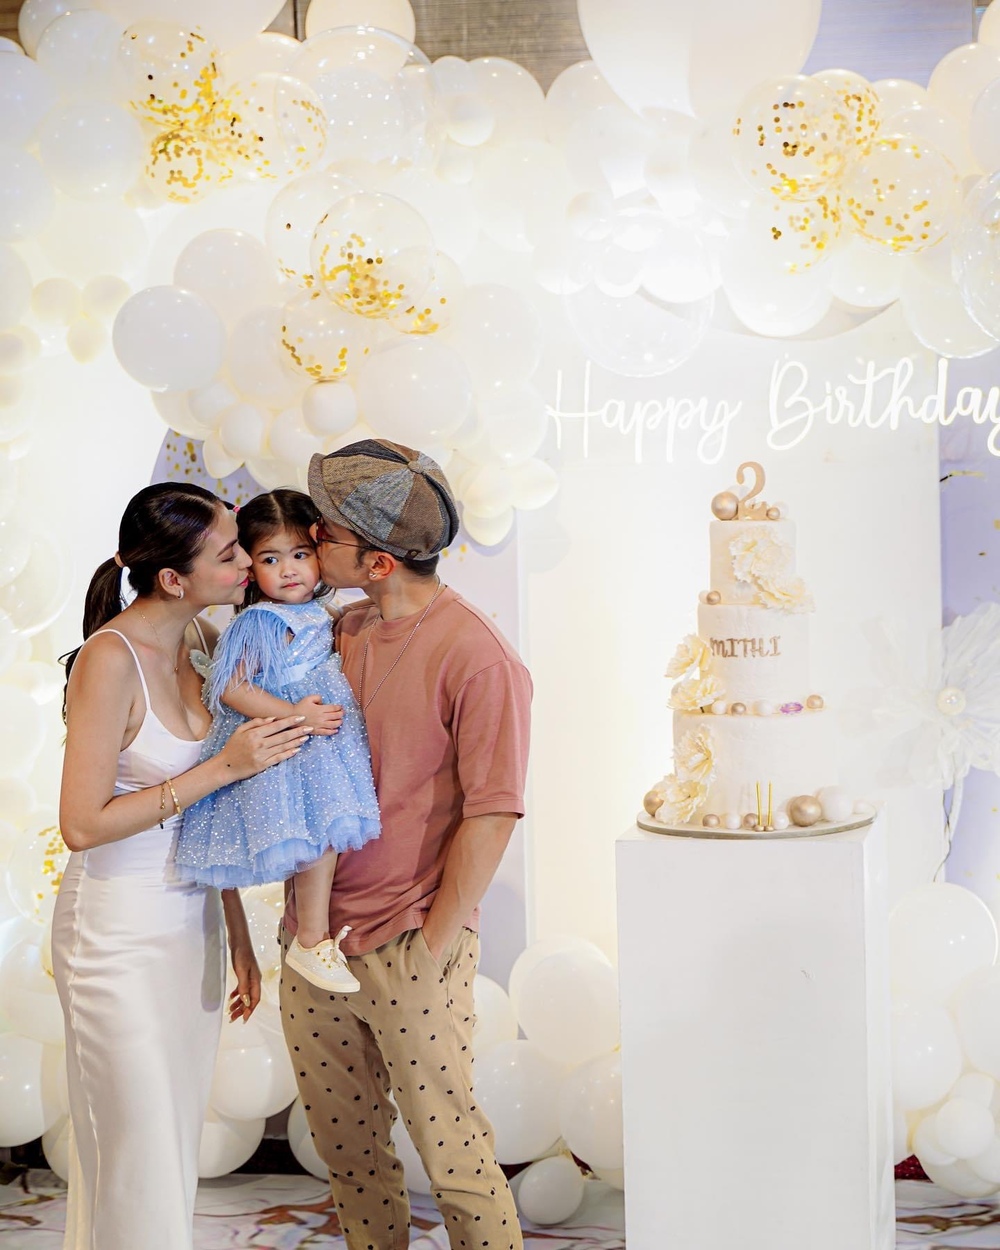 Former couple Carlo Aquino and Trina Candaza together for the birthday celebration of baby Mithi as she turns 2.